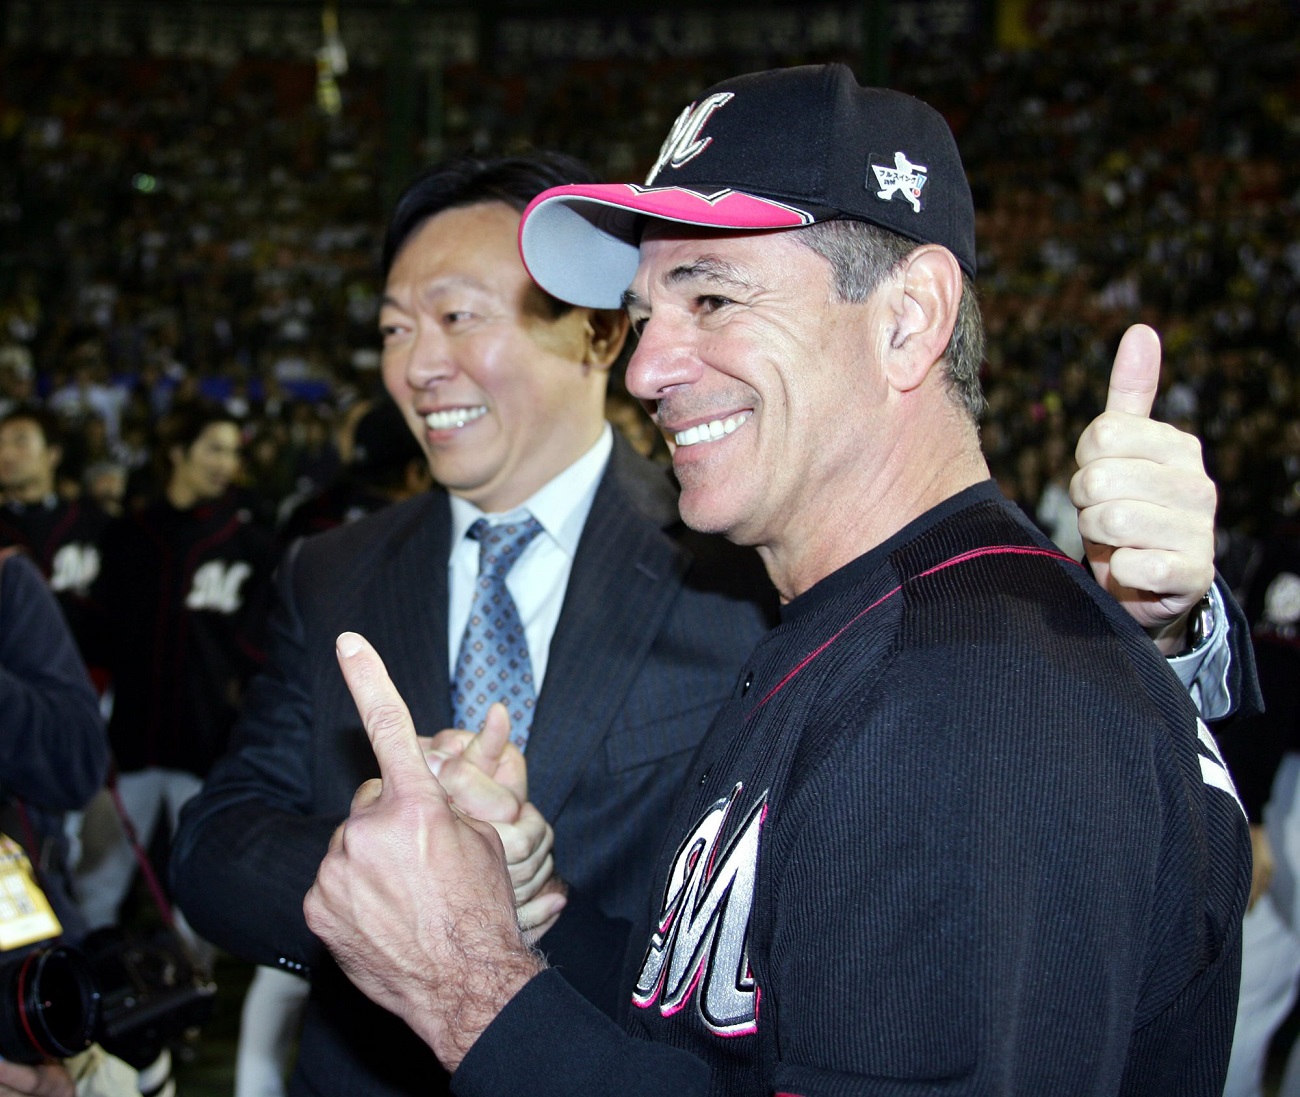 Odds and Evens Bobby Valentine Delights Online Audience with a Lifetime of Baseball Tales JAPAN Forward